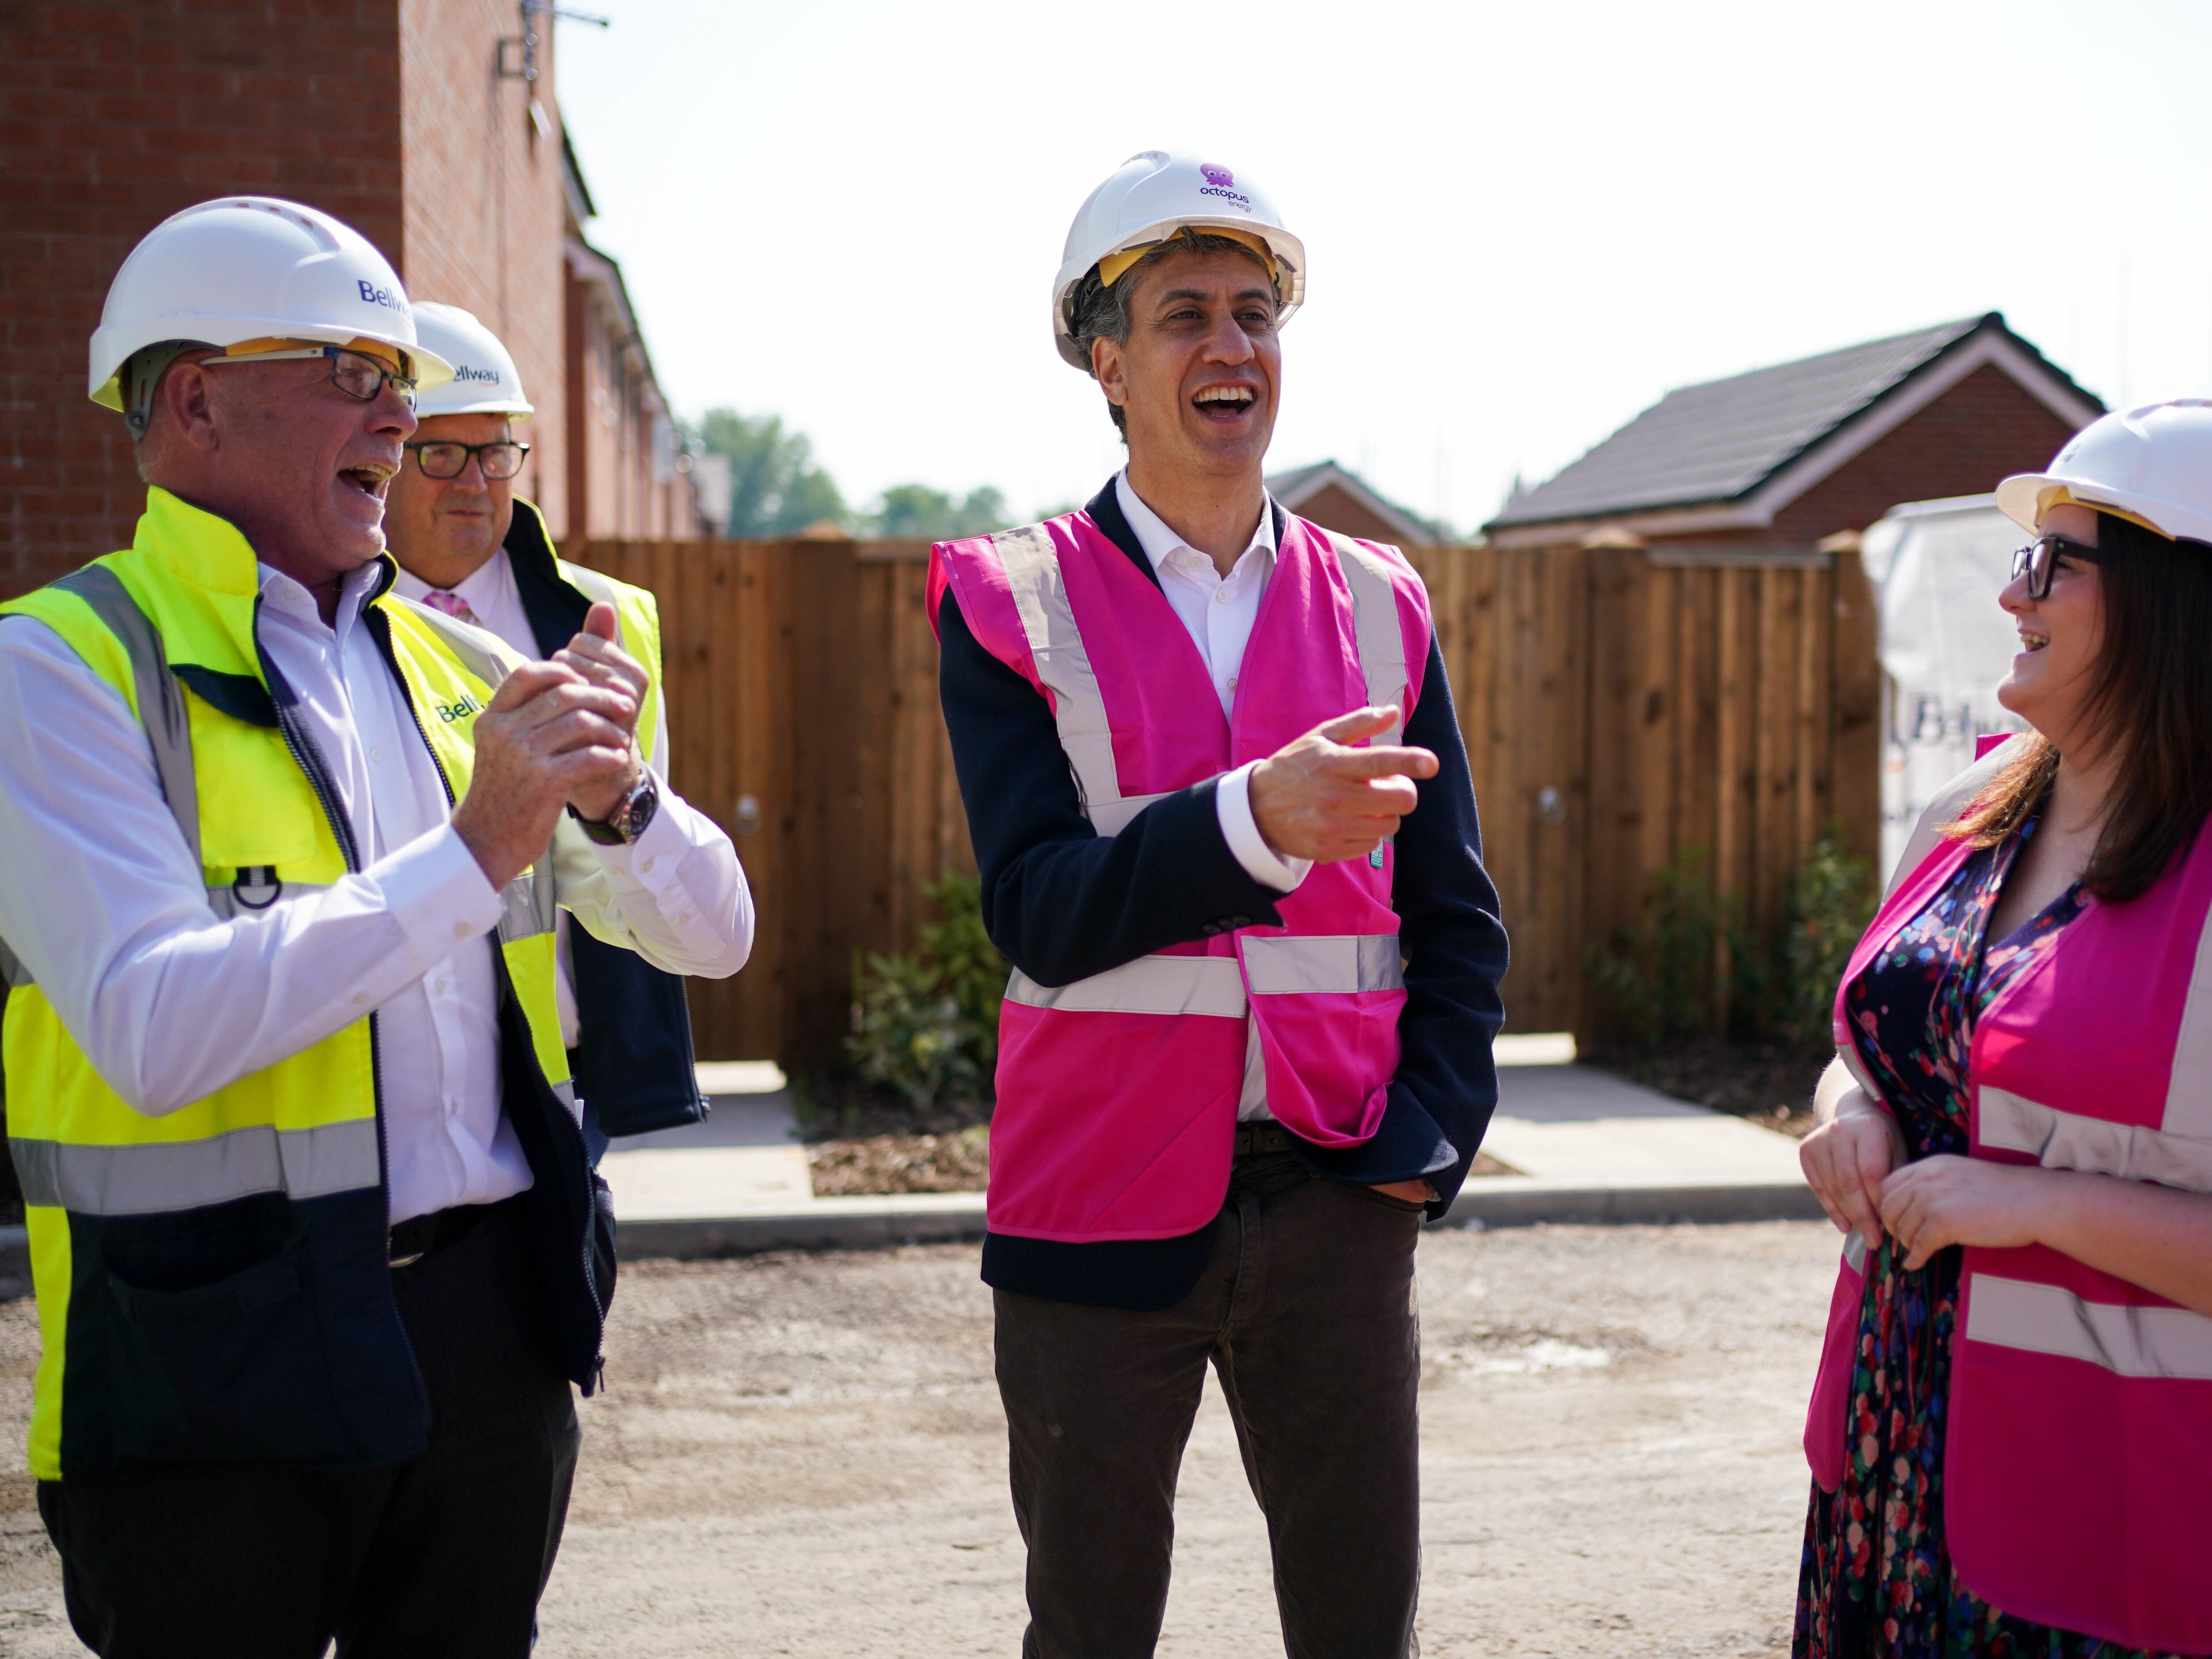 Labour will cut energy bills by allowing more wind farms, says Miliband during visit to area